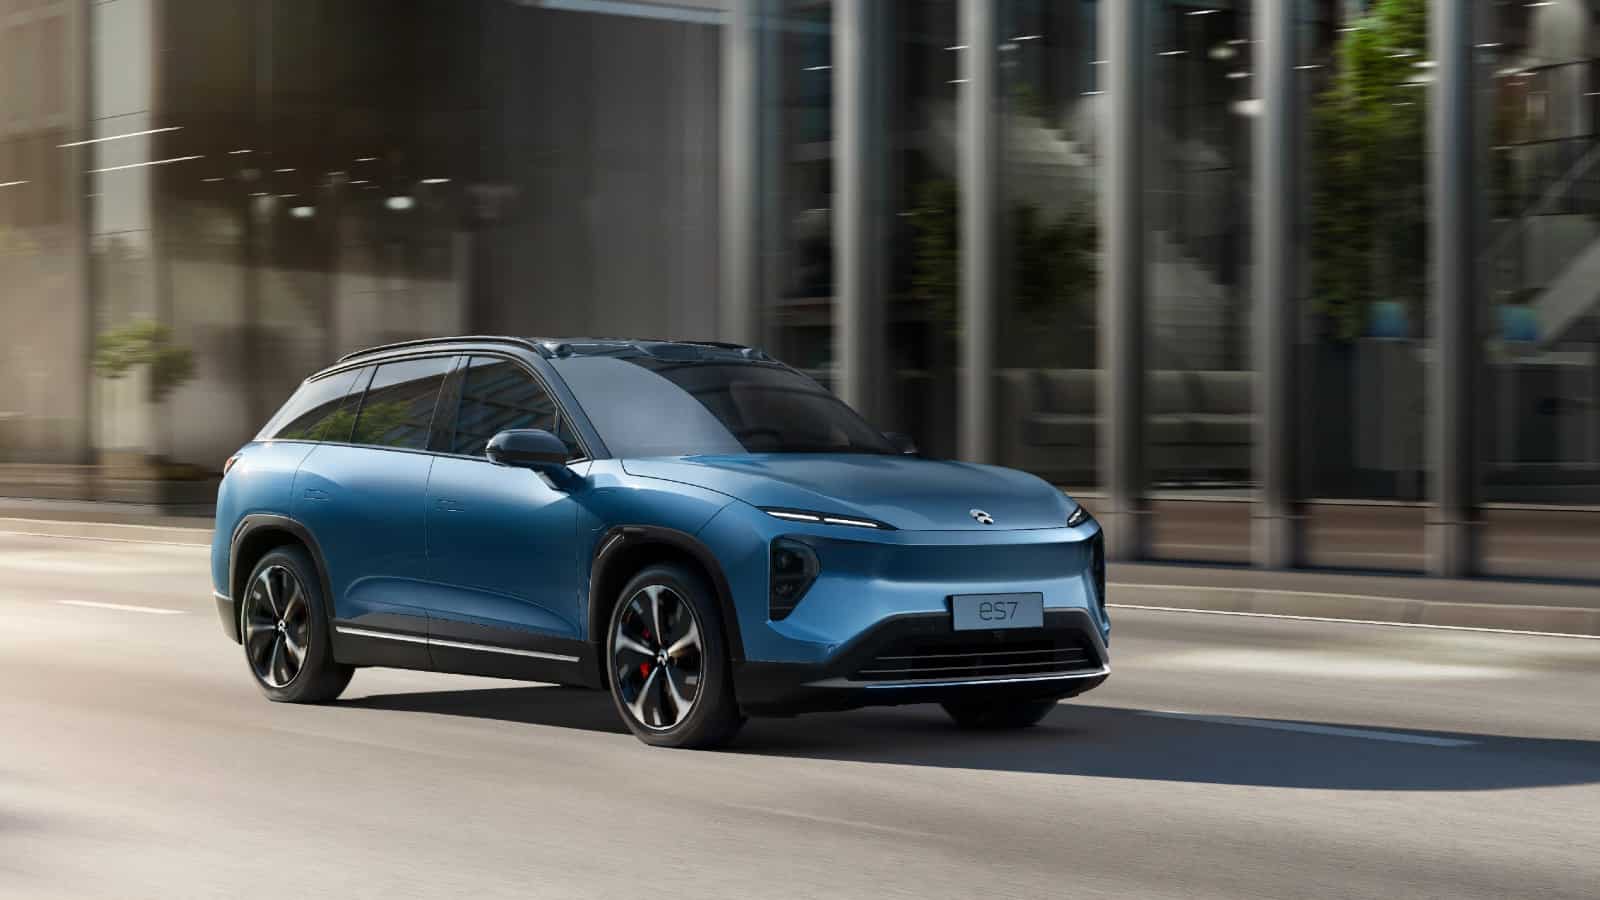 NIO Delivers First Batch of ES7 To Customers Across China